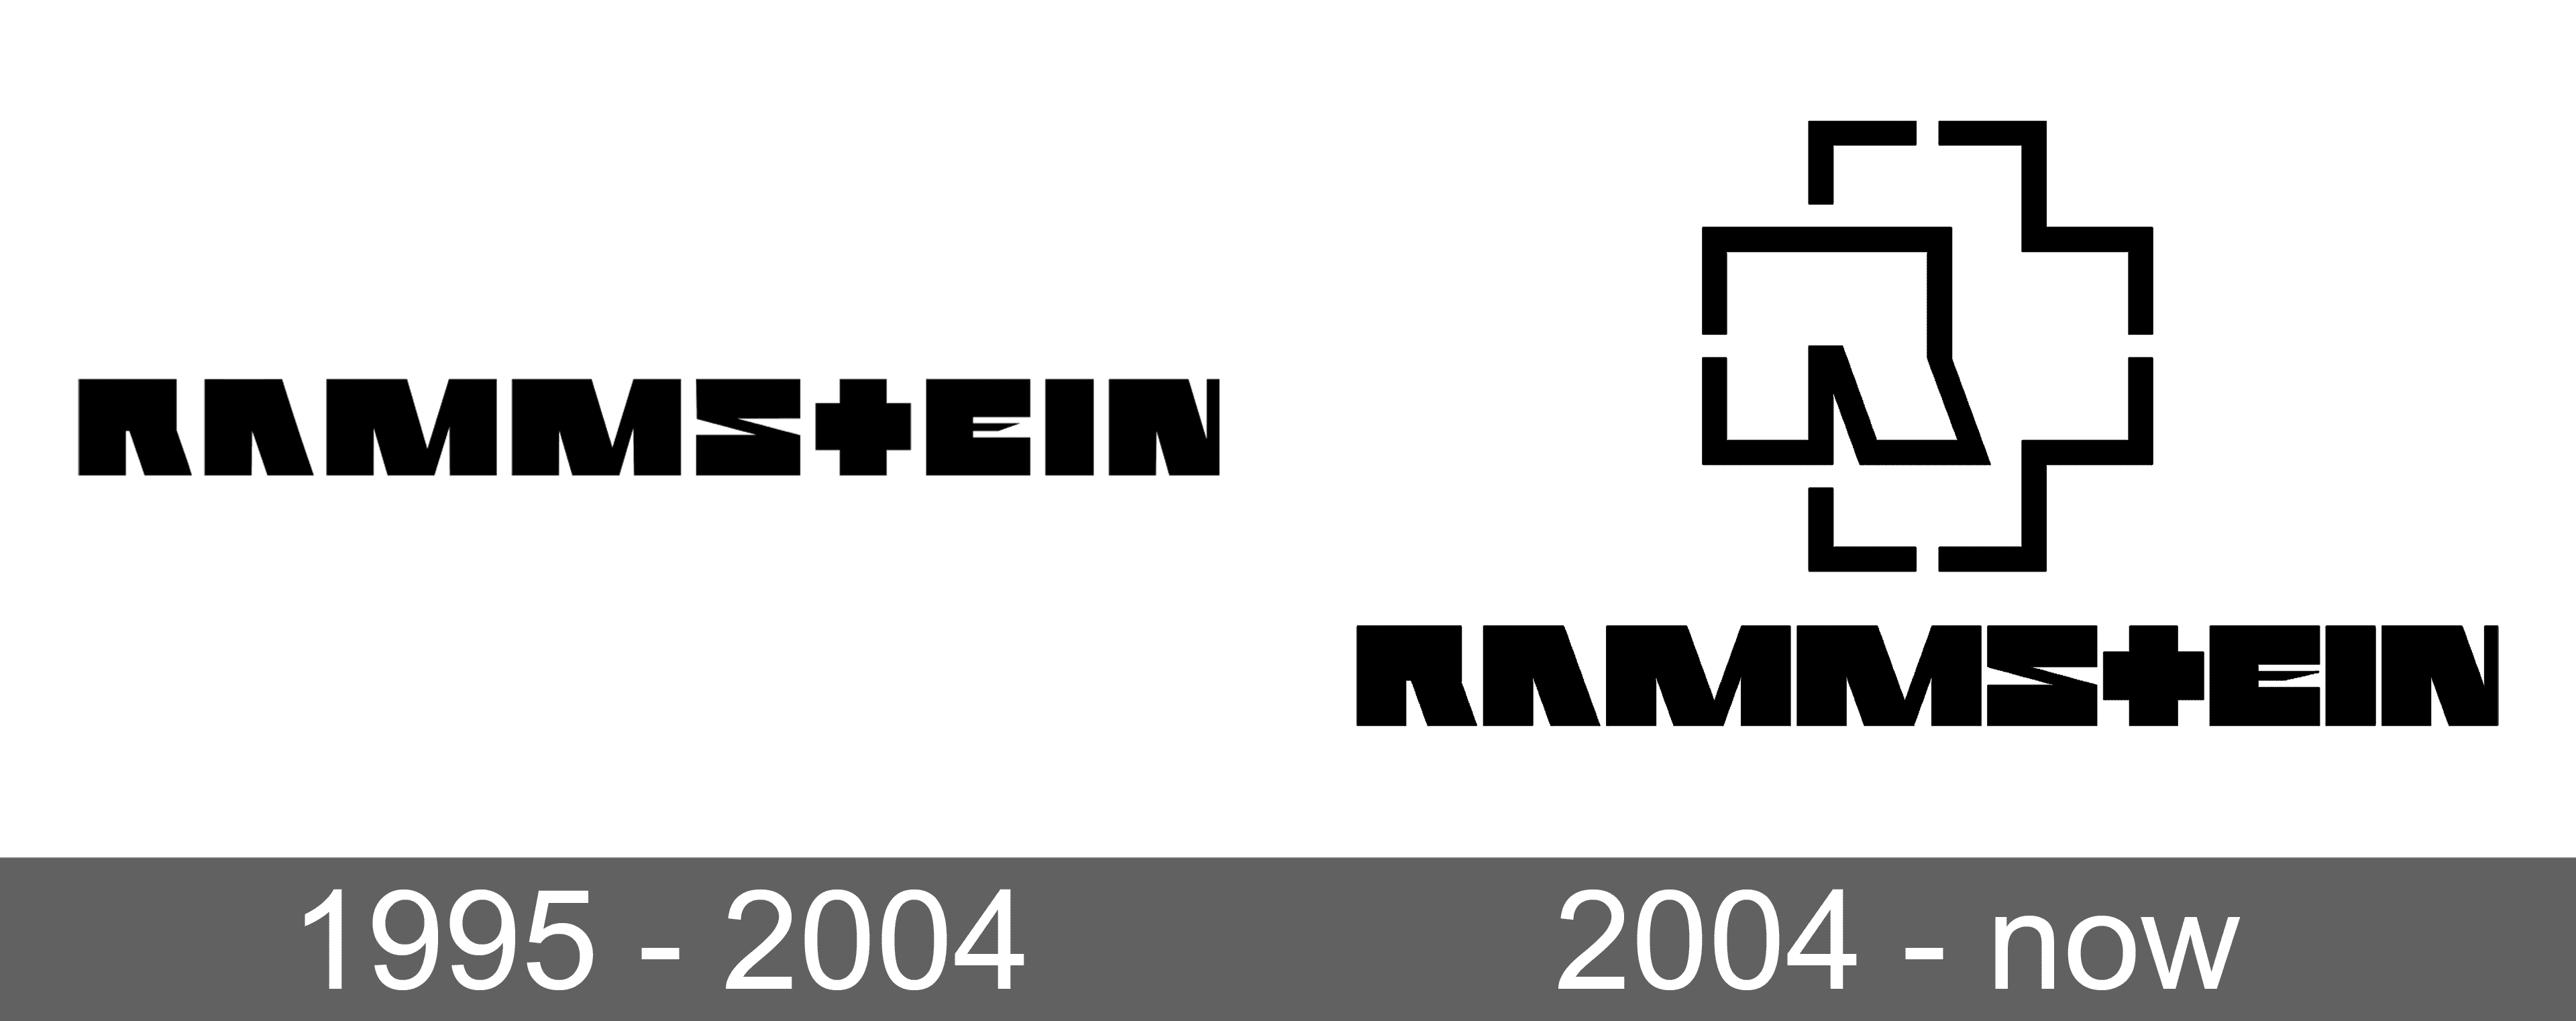 Rammstein Logo and symbol, meaning, history, sign.